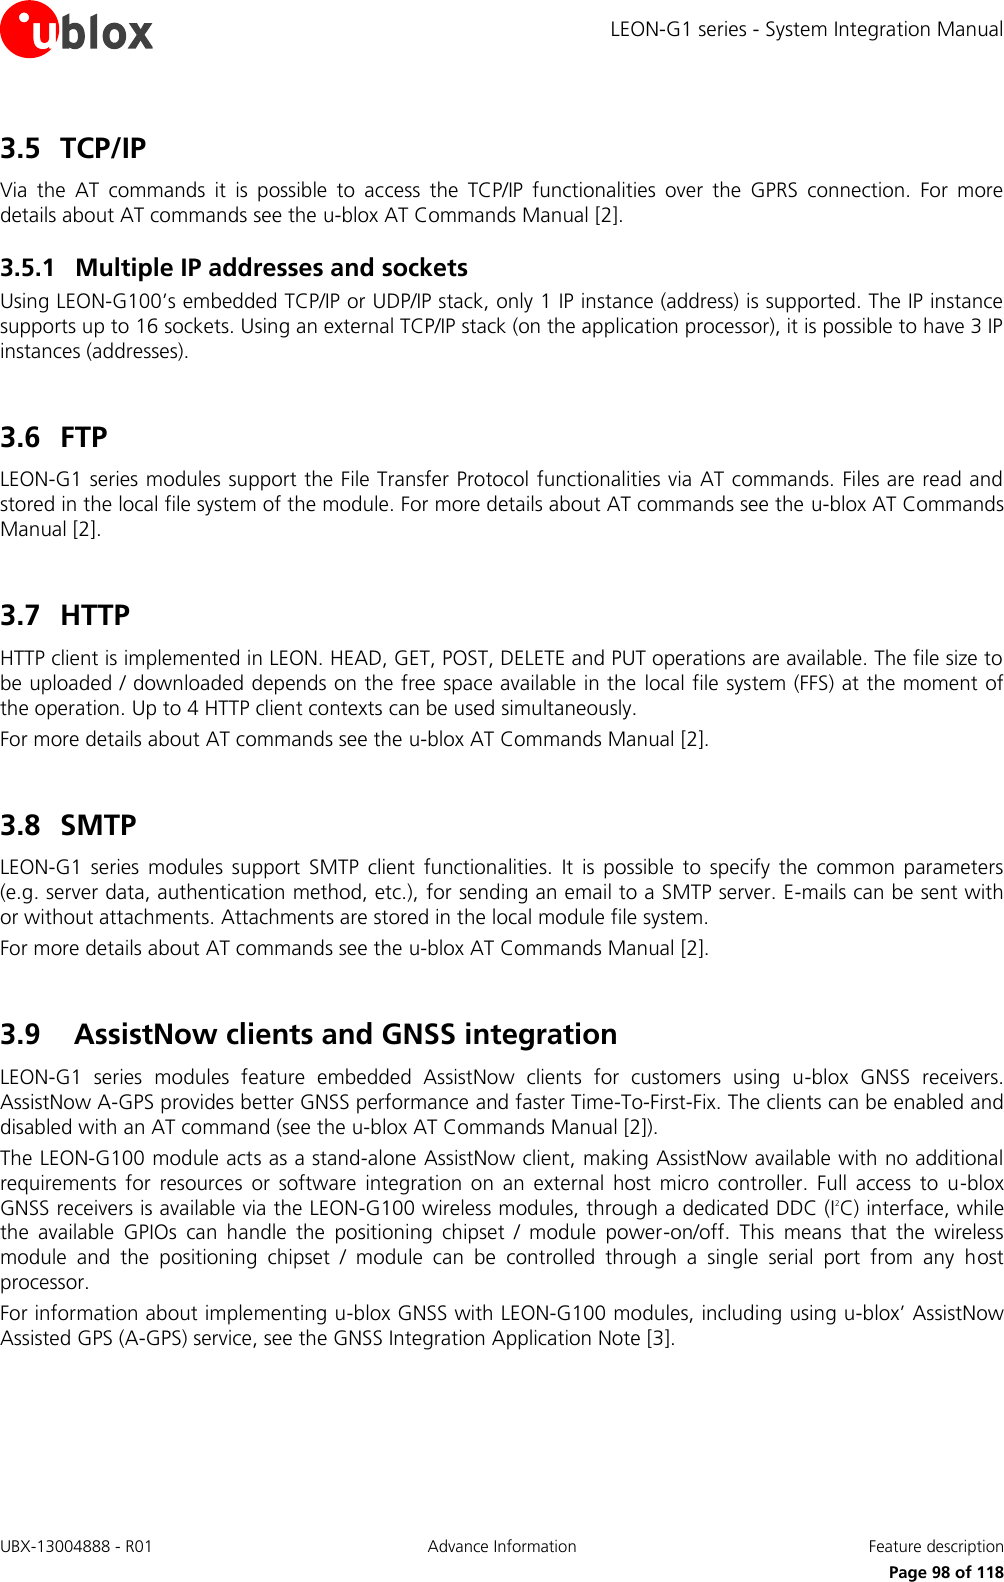 LEON-G1 series - System Integration Manual UBX-13004888 - R01  Advance Information  Feature description      Page 98 of 118 3.5 TCP/IP Via  the  AT  commands  it  is  possible  to  access  the  TCP/IP  functionalities  over  the  GPRS  connection.  For  more details about AT commands see the u-blox AT Commands Manual [2]. 3.5.1 Multiple IP addresses and sockets Using LEON-G100’s embedded TCP/IP or UDP/IP stack, only 1 IP instance (address) is supported. The IP instance supports up to 16 sockets. Using an external TCP/IP stack (on the application processor), it is possible to have 3 IP instances (addresses).  3.6 FTP LEON-G1 series modules support the File Transfer Protocol functionalities via AT commands. Files are read and stored in the local file system of the module. For more details about AT commands see the u-blox AT Commands Manual [2].  3.7 HTTP HTTP client is implemented in LEON. HEAD, GET, POST, DELETE and PUT operations are available. The file size to be uploaded / downloaded depends on the free space available in the local file system (FFS) at the moment of the operation. Up to 4 HTTP client contexts can be used simultaneously. For more details about AT commands see the u-blox AT Commands Manual [2].  3.8 SMTP LEON-G1  series  modules  support  SMTP  client  functionalities.  It  is possible  to  specify  the  common  parameters (e.g. server data, authentication method, etc.), for sending an email to a SMTP server. E-mails can be sent with or without attachments. Attachments are stored in the local module file system. For more details about AT commands see the u-blox AT Commands Manual [2].  3.9 AssistNow clients and GNSS integration LEON-G1  series  modules  feature  embedded  AssistNow  clients  for  customers  using  u-blox  GNSS  receivers. AssistNow A-GPS provides better GNSS performance and faster Time-To-First-Fix. The clients can be enabled and disabled with an AT command (see the u-blox AT Commands Manual [2]). The LEON-G100 module acts as a stand-alone AssistNow client, making AssistNow available with no additional requirements  for  resources  or  software  integration  on  an  external  host  micro controller.  Full  access  to  u-blox GNSS receivers is available via the LEON-G100 wireless modules, through a dedicated DDC (I2C) interface, while the  available  GPIOs  can  handle  the  positioning  chipset  /  module  power-on/off.  This  means  that  the  wireless module  and  the  positioning  chipset  /  module  can  be  controlled  through  a  single  serial  port  from  any  host processor. For information about implementing u-blox GNSS with LEON-G100 modules, including using u-blox’ AssistNow Assisted GPS (A-GPS) service, see the GNSS Integration Application Note [3].  